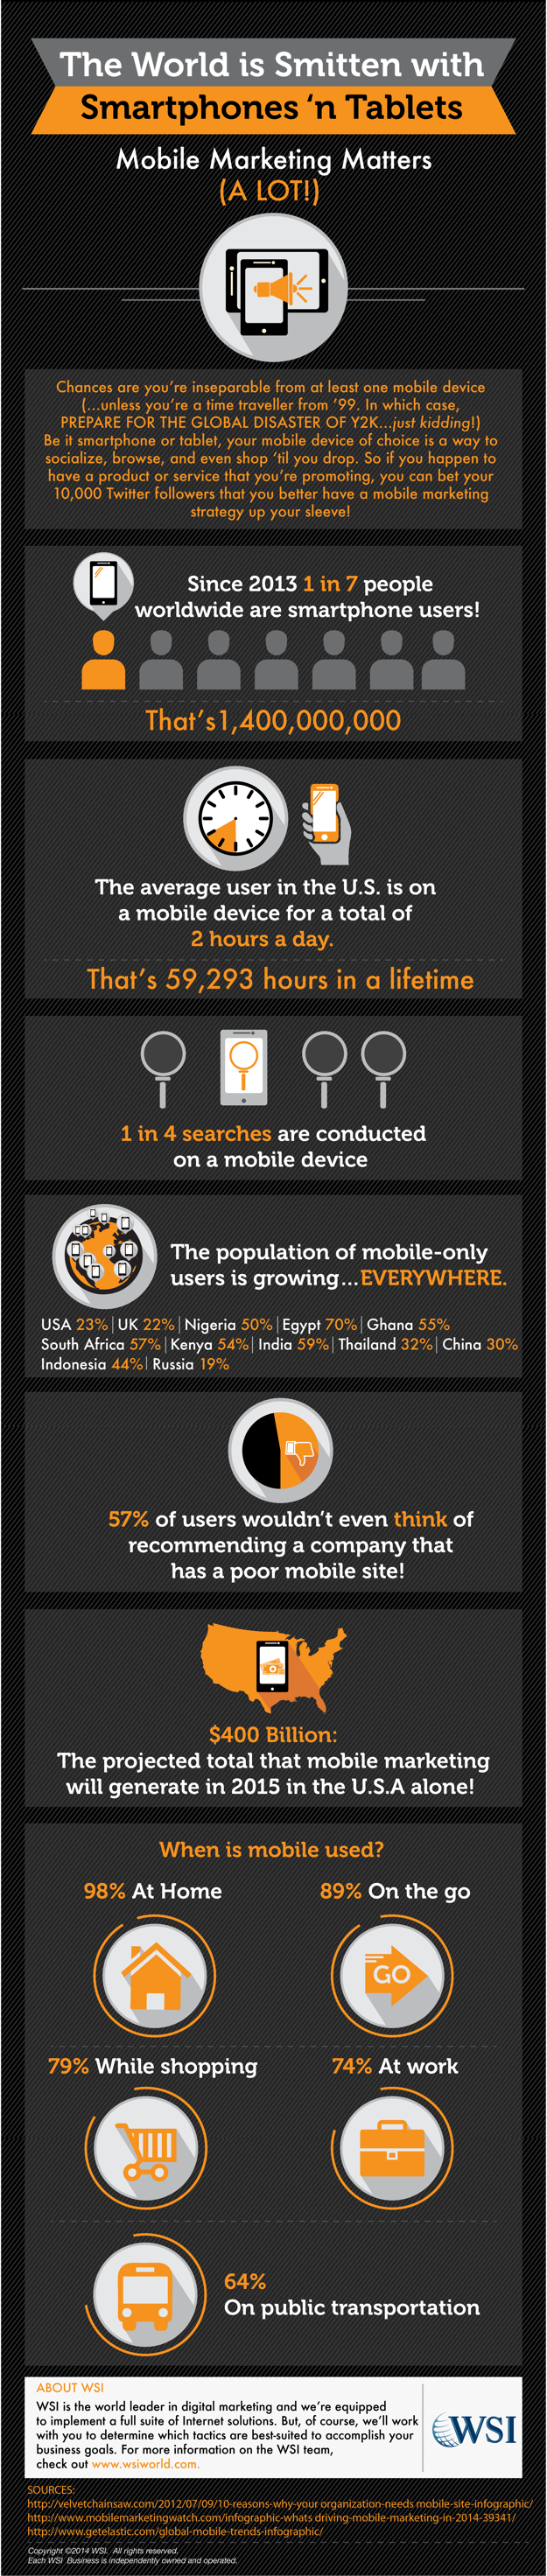 The World Is Addicitve With Mobile phones And Tablets: Which means Mobile Marketing Matters A Lot - latest facts figures and statistics